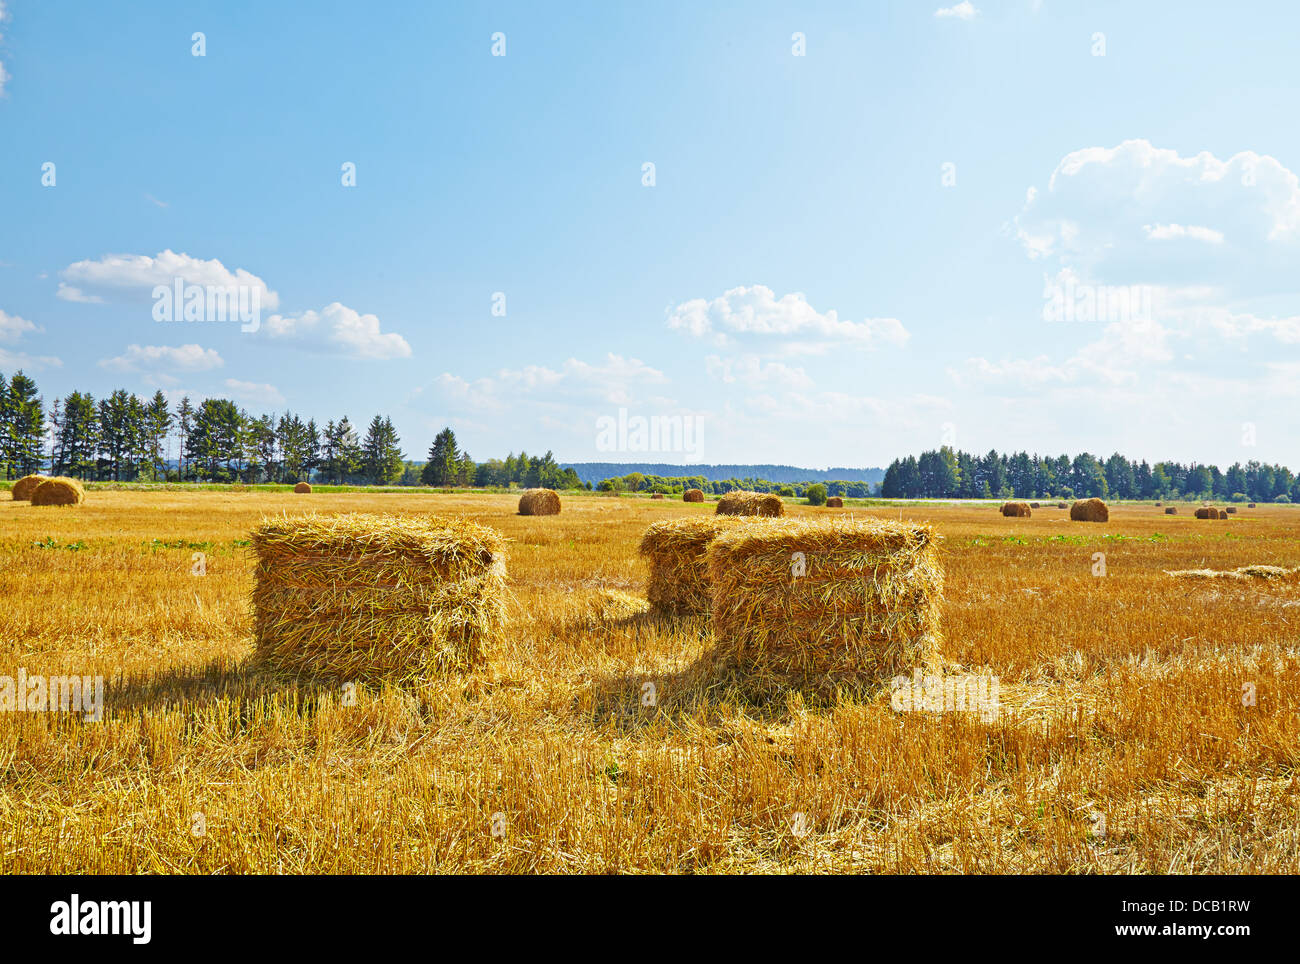 Hay vertical rolls on harvest field. Sunny day. Stock Photo